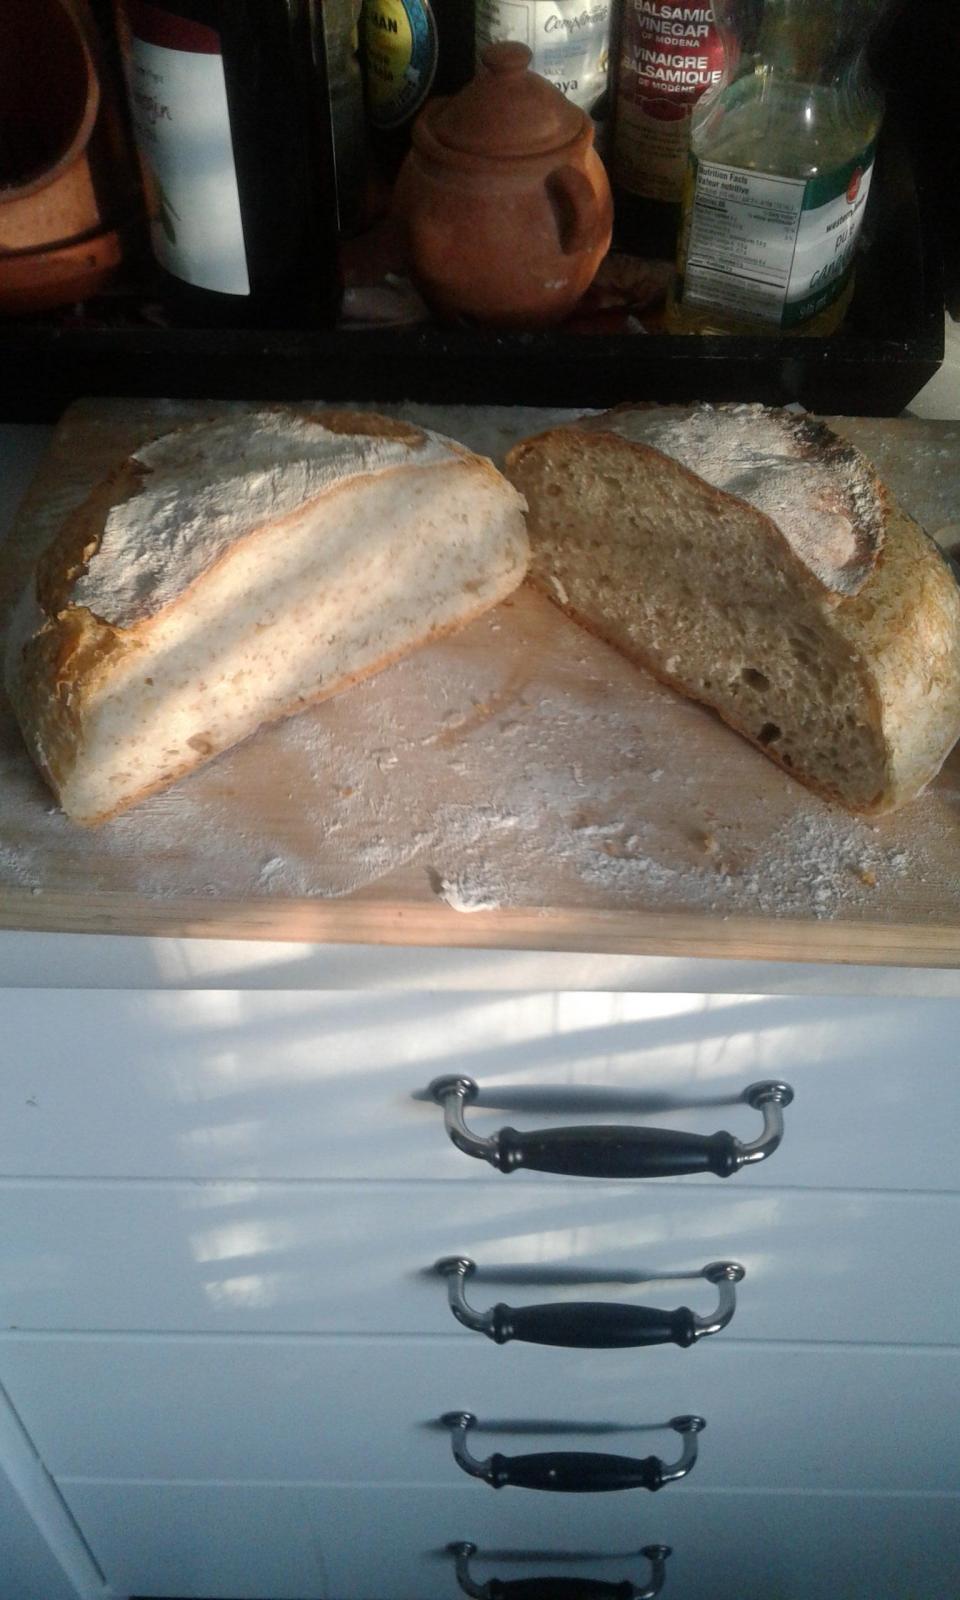 One of the best loaves Ive made. Not a super open crumb but the flavour was increadible and texture was perfect.